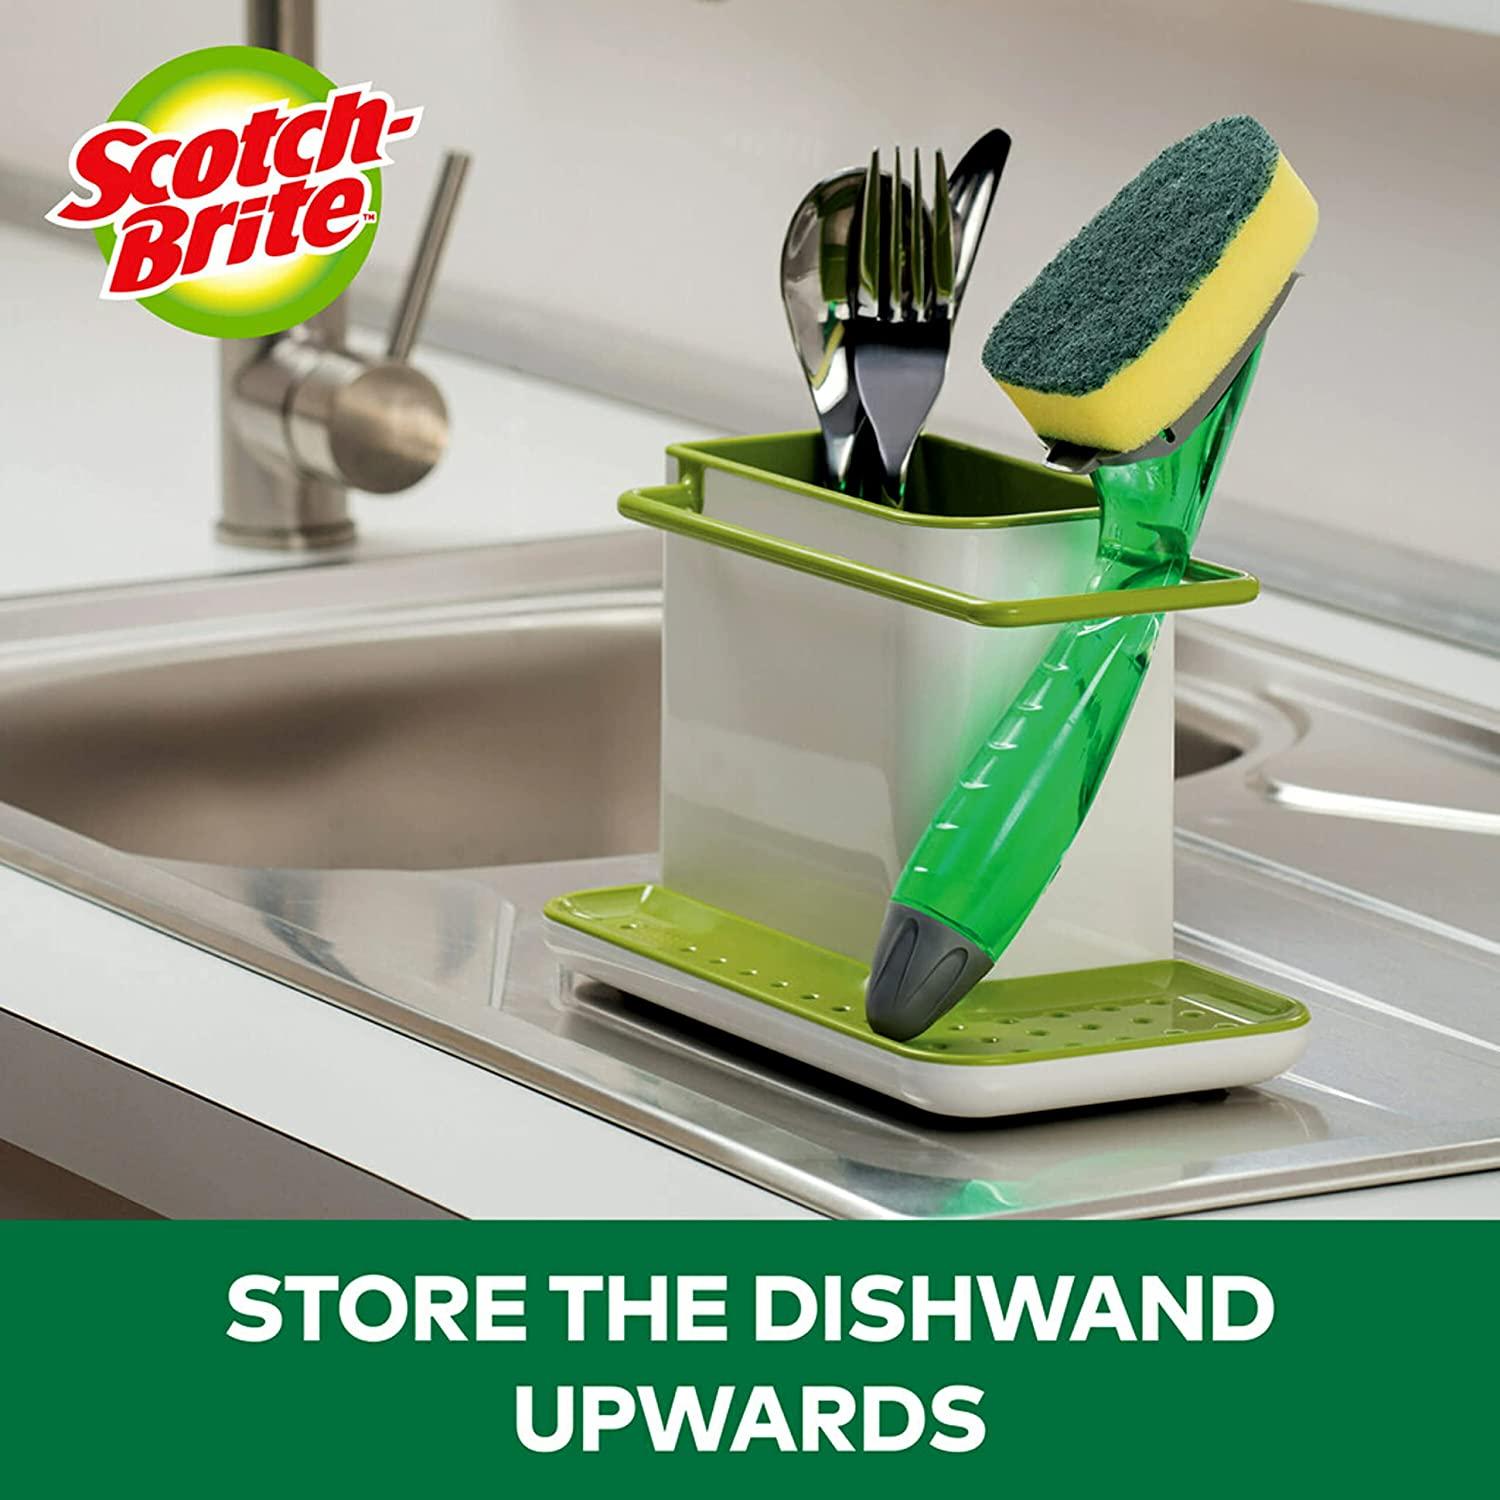 Scotch-Brite Heavy Duty Dishwand Refills, Keep Your Hands Out of